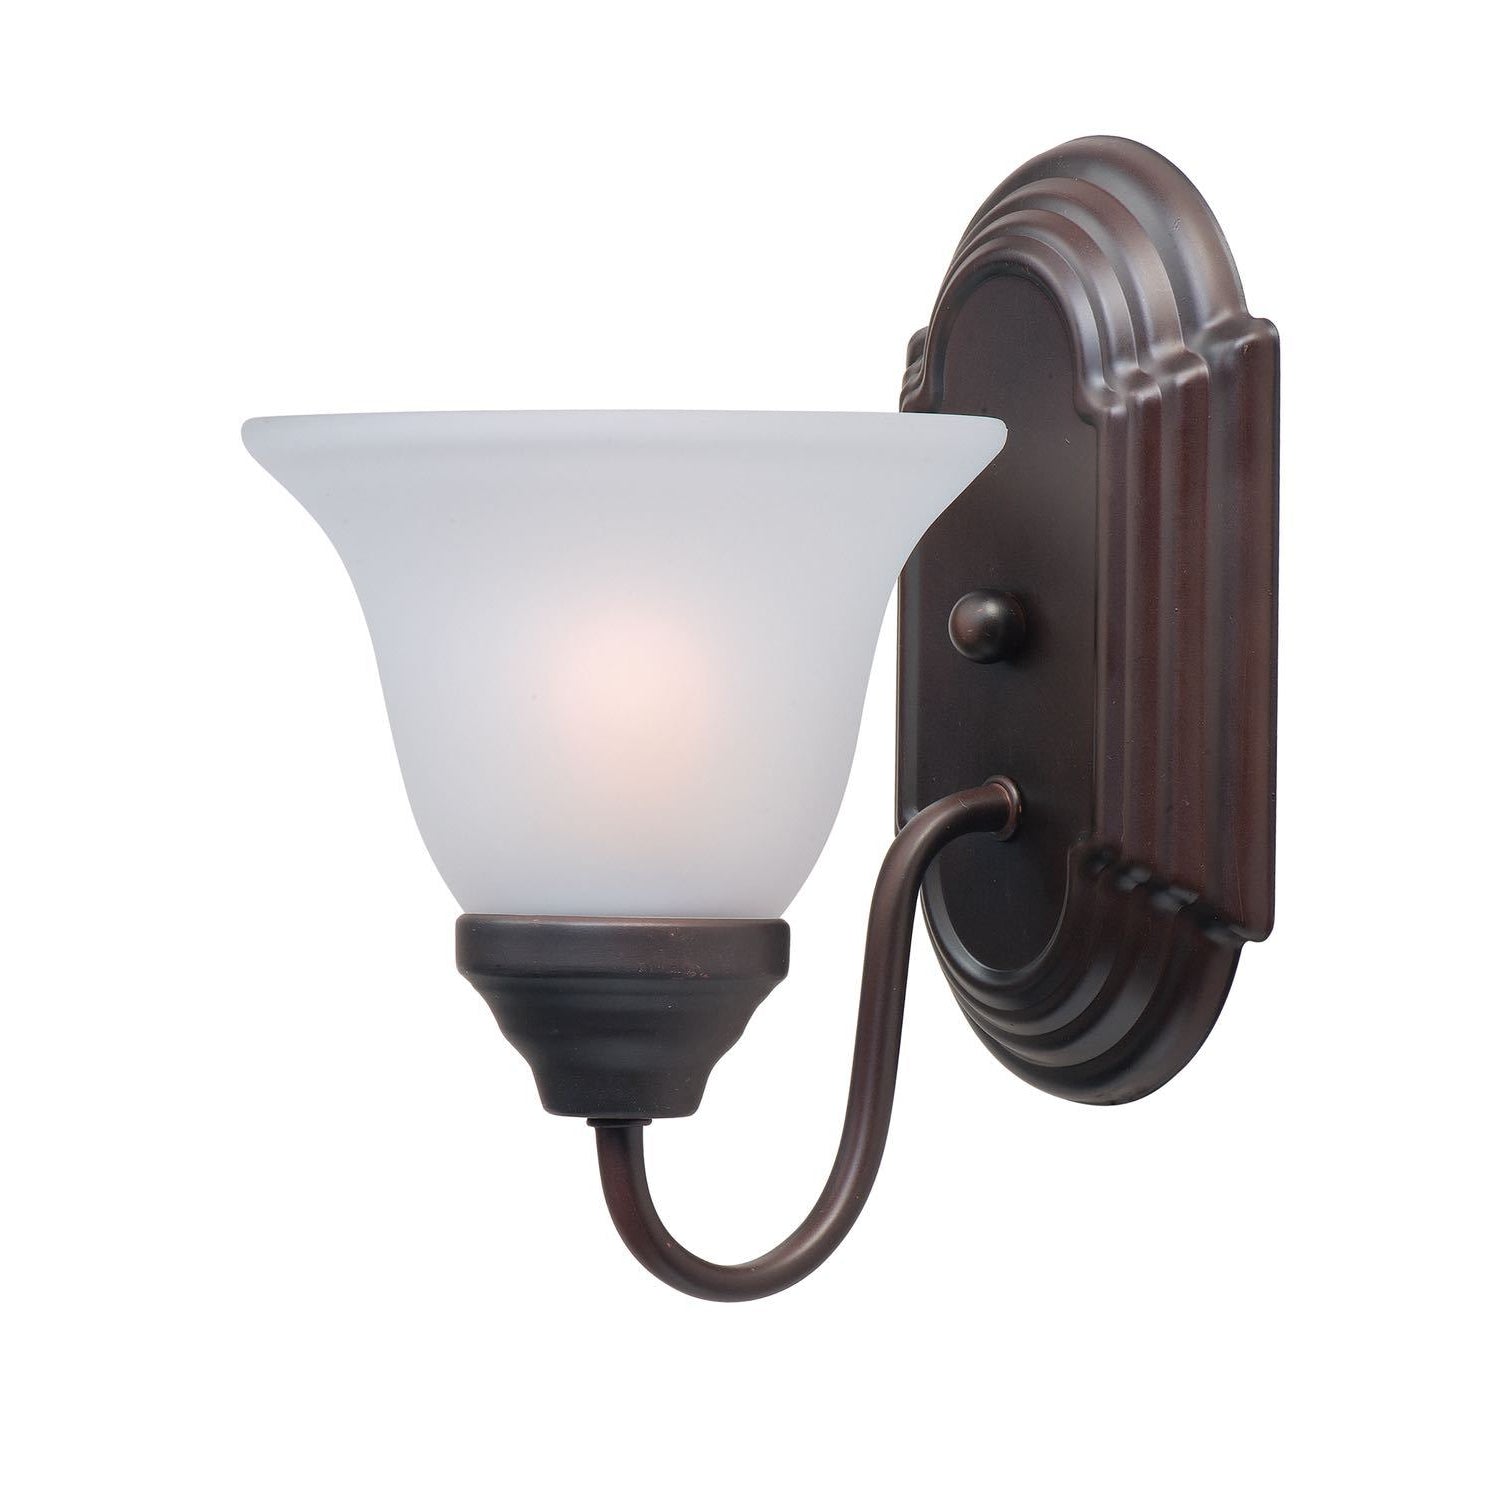 Essentials - 801x Sconce Oil Rubbed Bronze | Frost